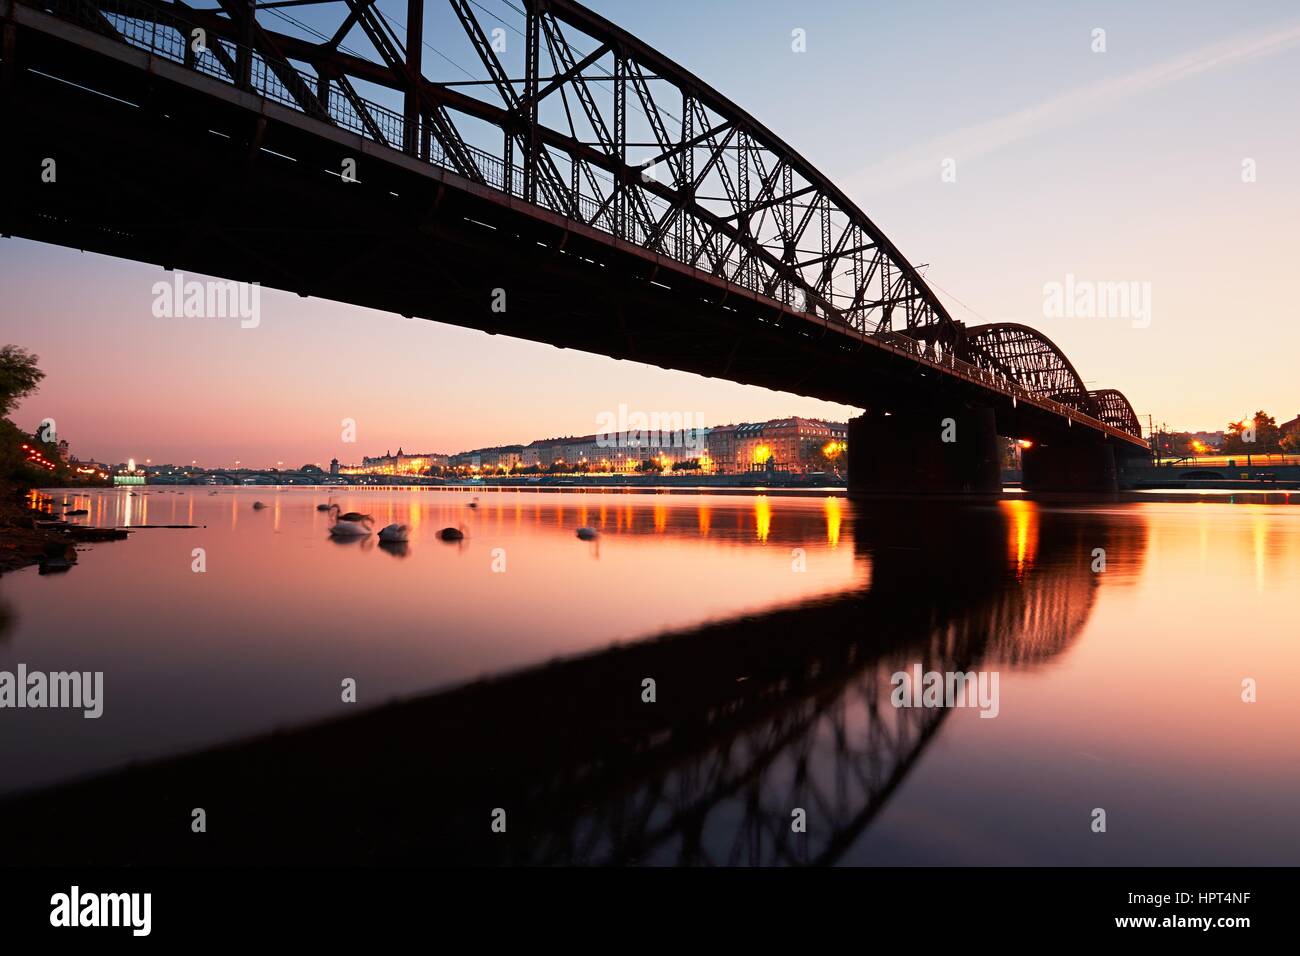 Amazing sunrise in the city. Railway bridge (with reflection in the river) and embankment in Prague, Czech Republic. Stock Photo